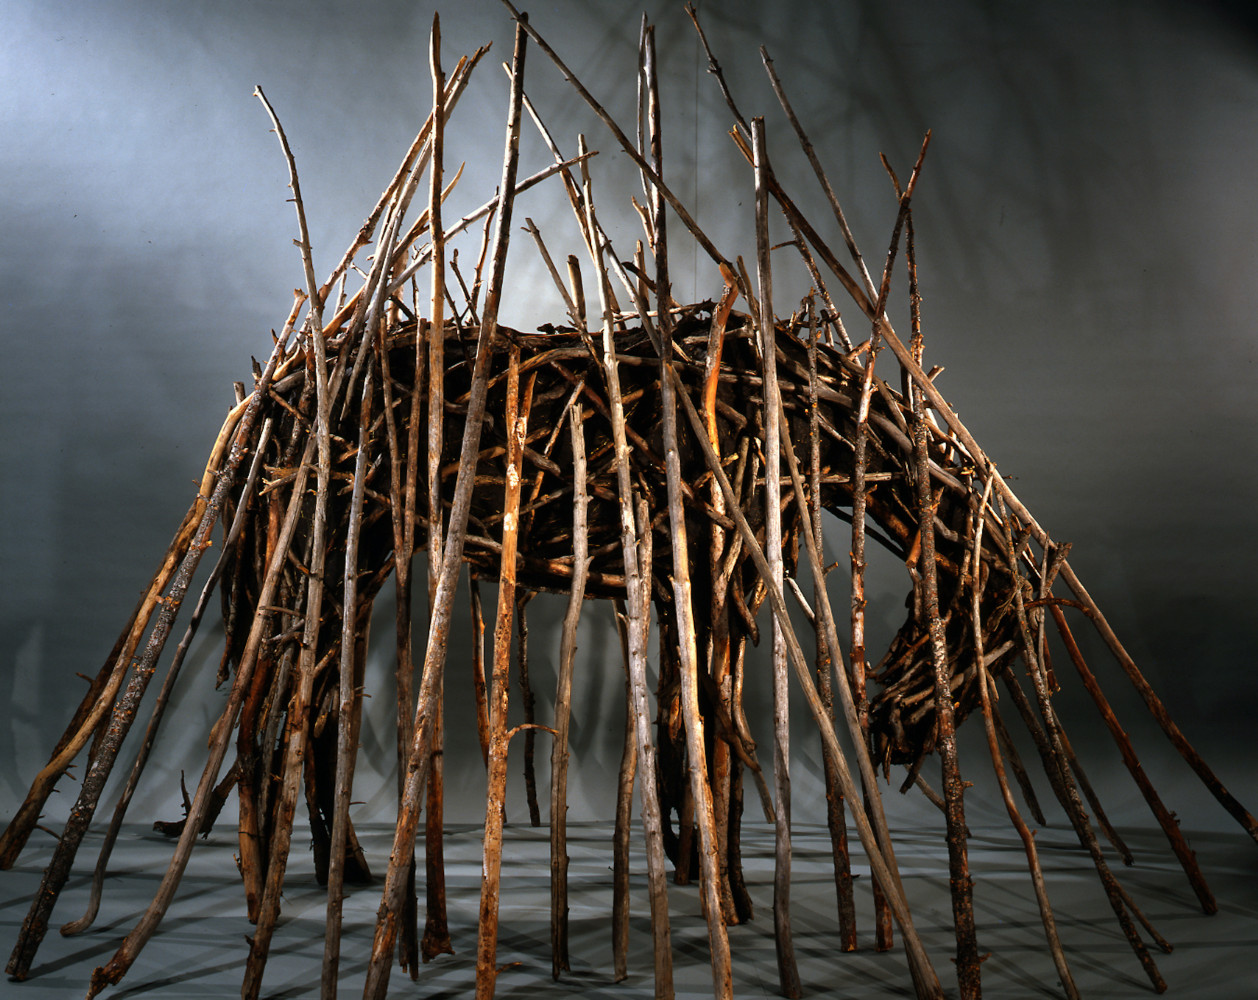 Sculpture of a standing horse made out of mud, sticks, and steel surrounded by twigs by Deborah Butterfield